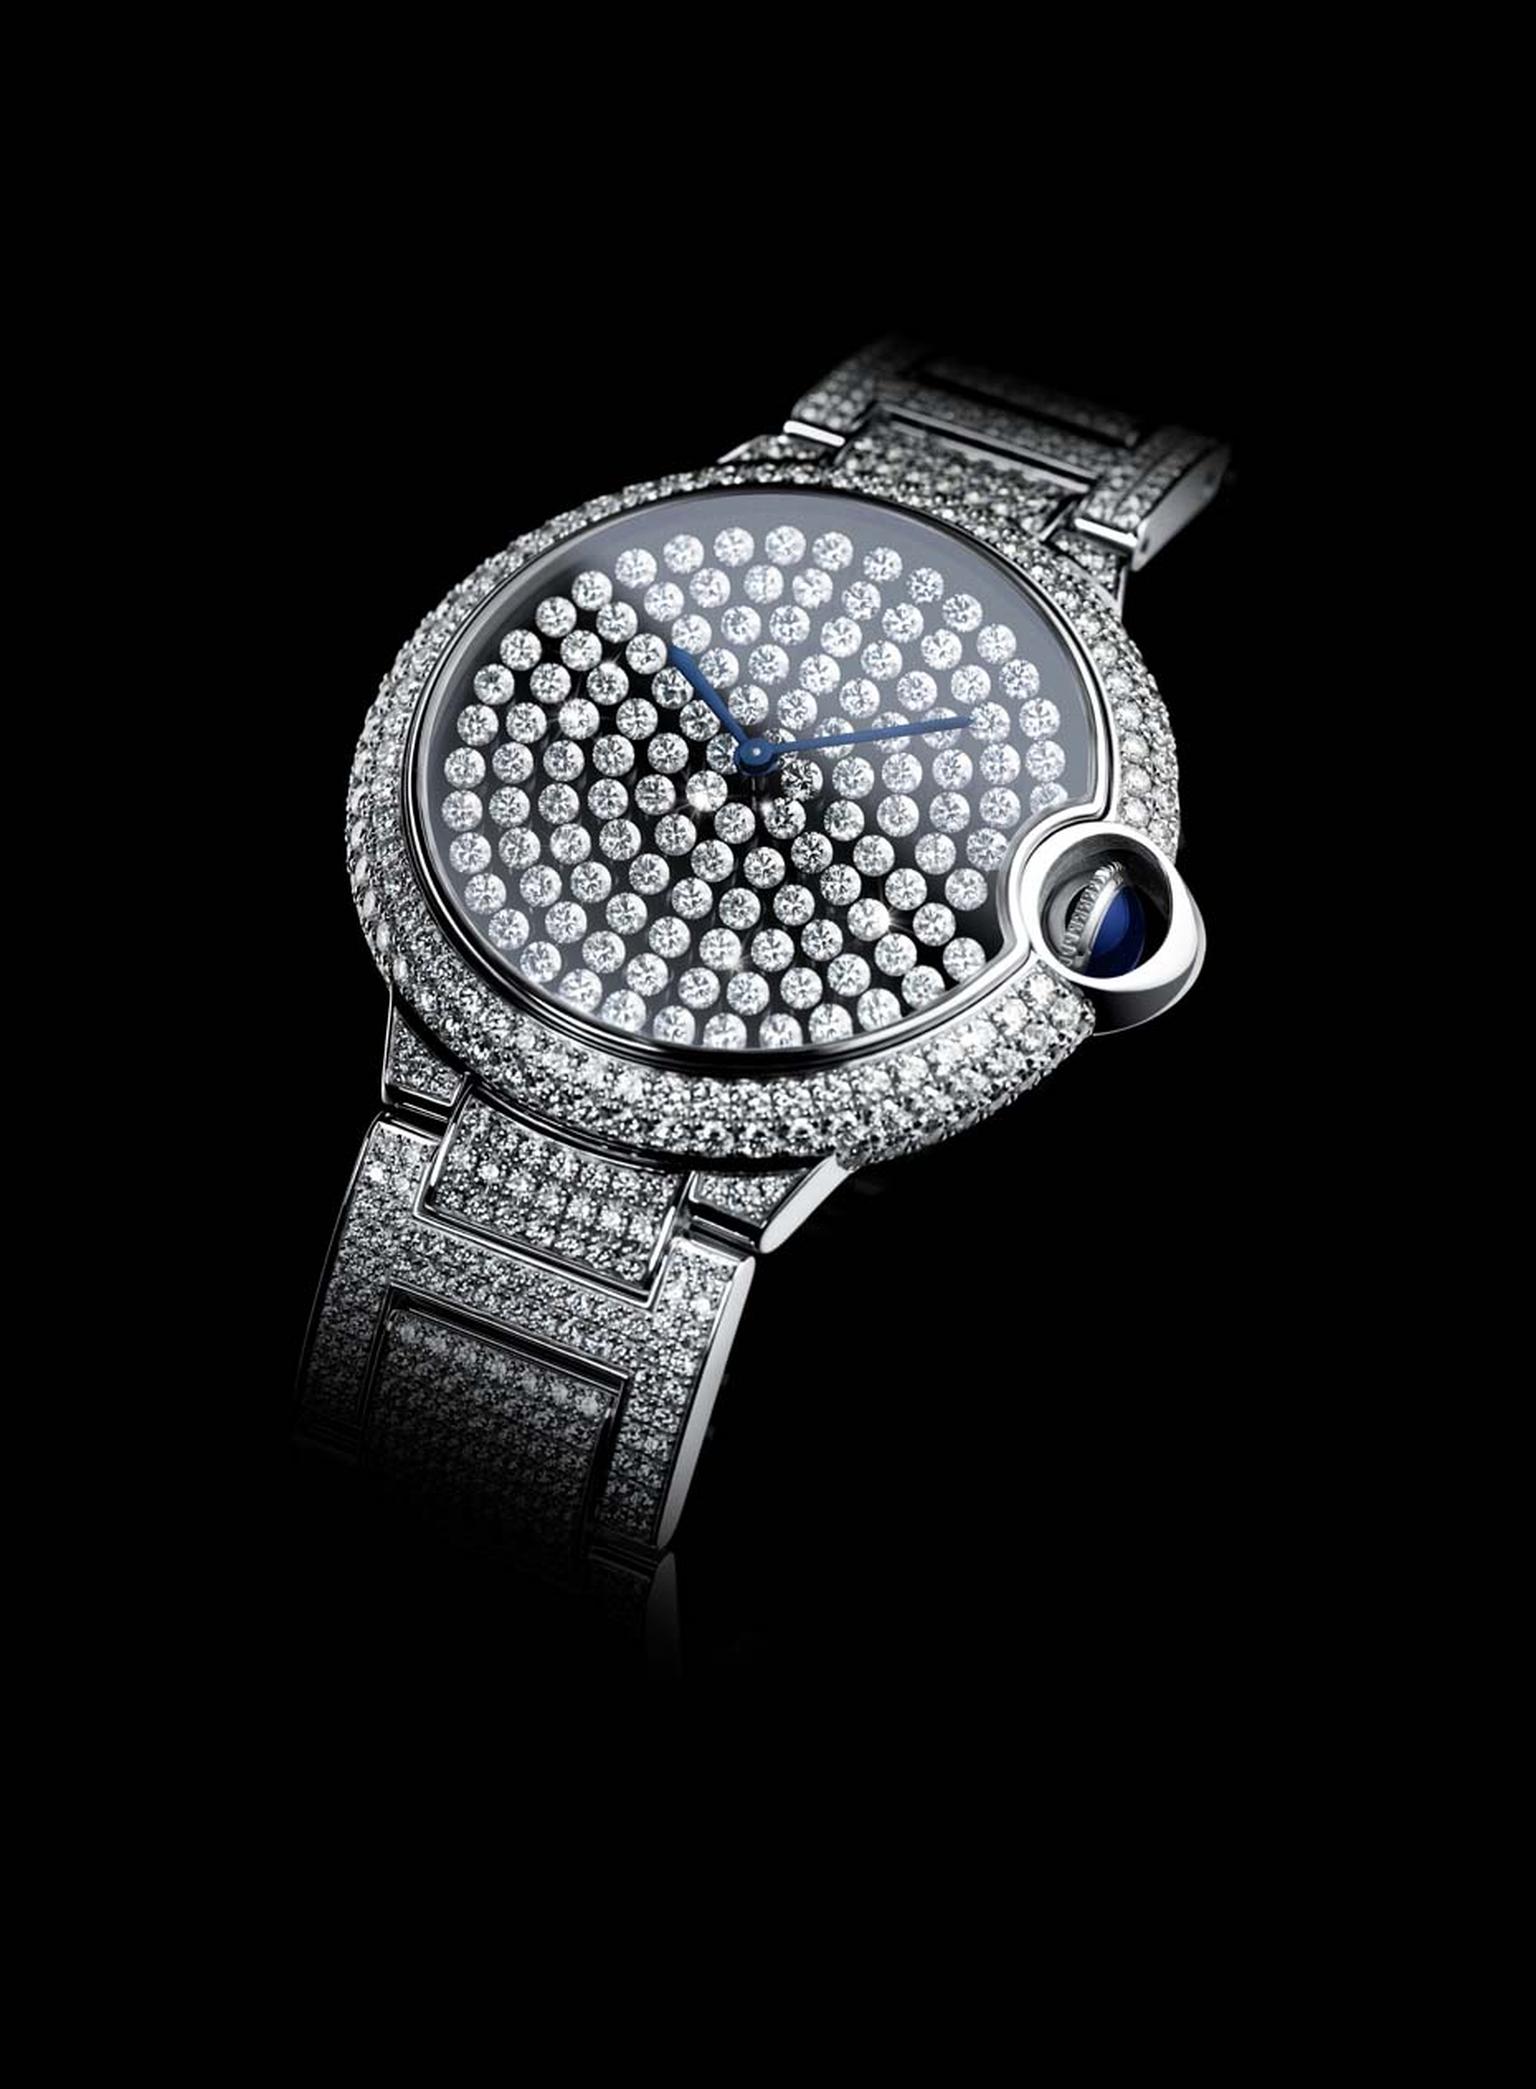 In this remarkable Cartier Ballon Bleu high jewellery watch, all the diamonds on the dial jiggle and sway in time to your movements. The team at Cartier has patented the new Vibrating Setting, which is invisible to the naked eye and allows the diamonds to